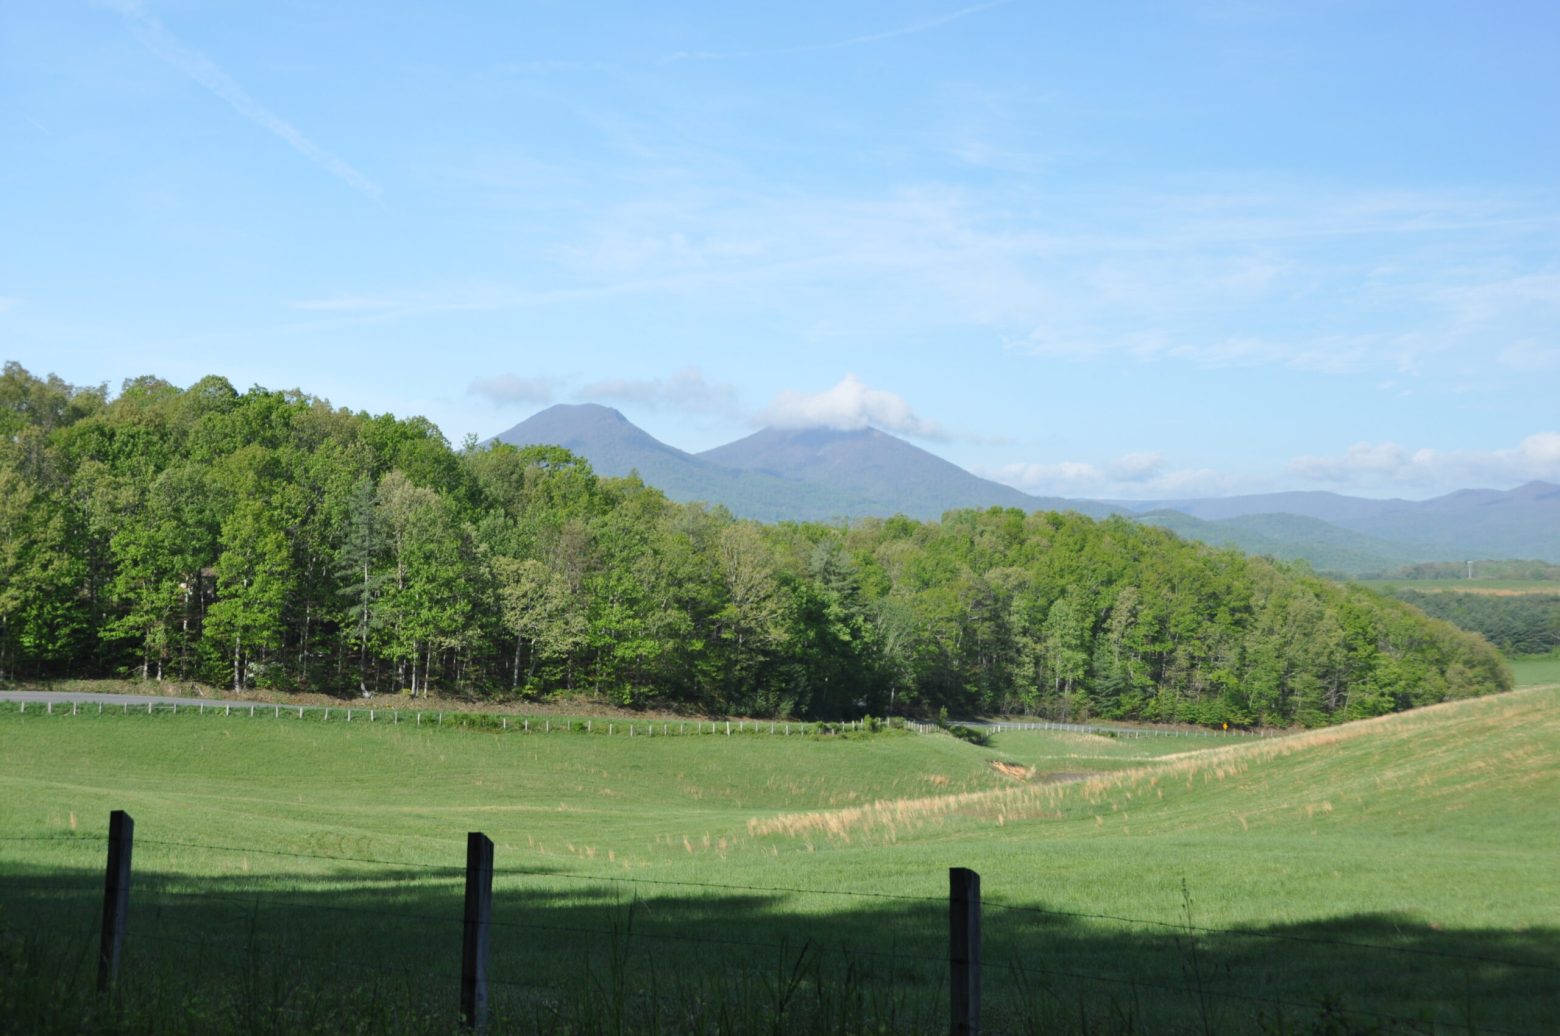 Hosue Mountains from Maple Swamp